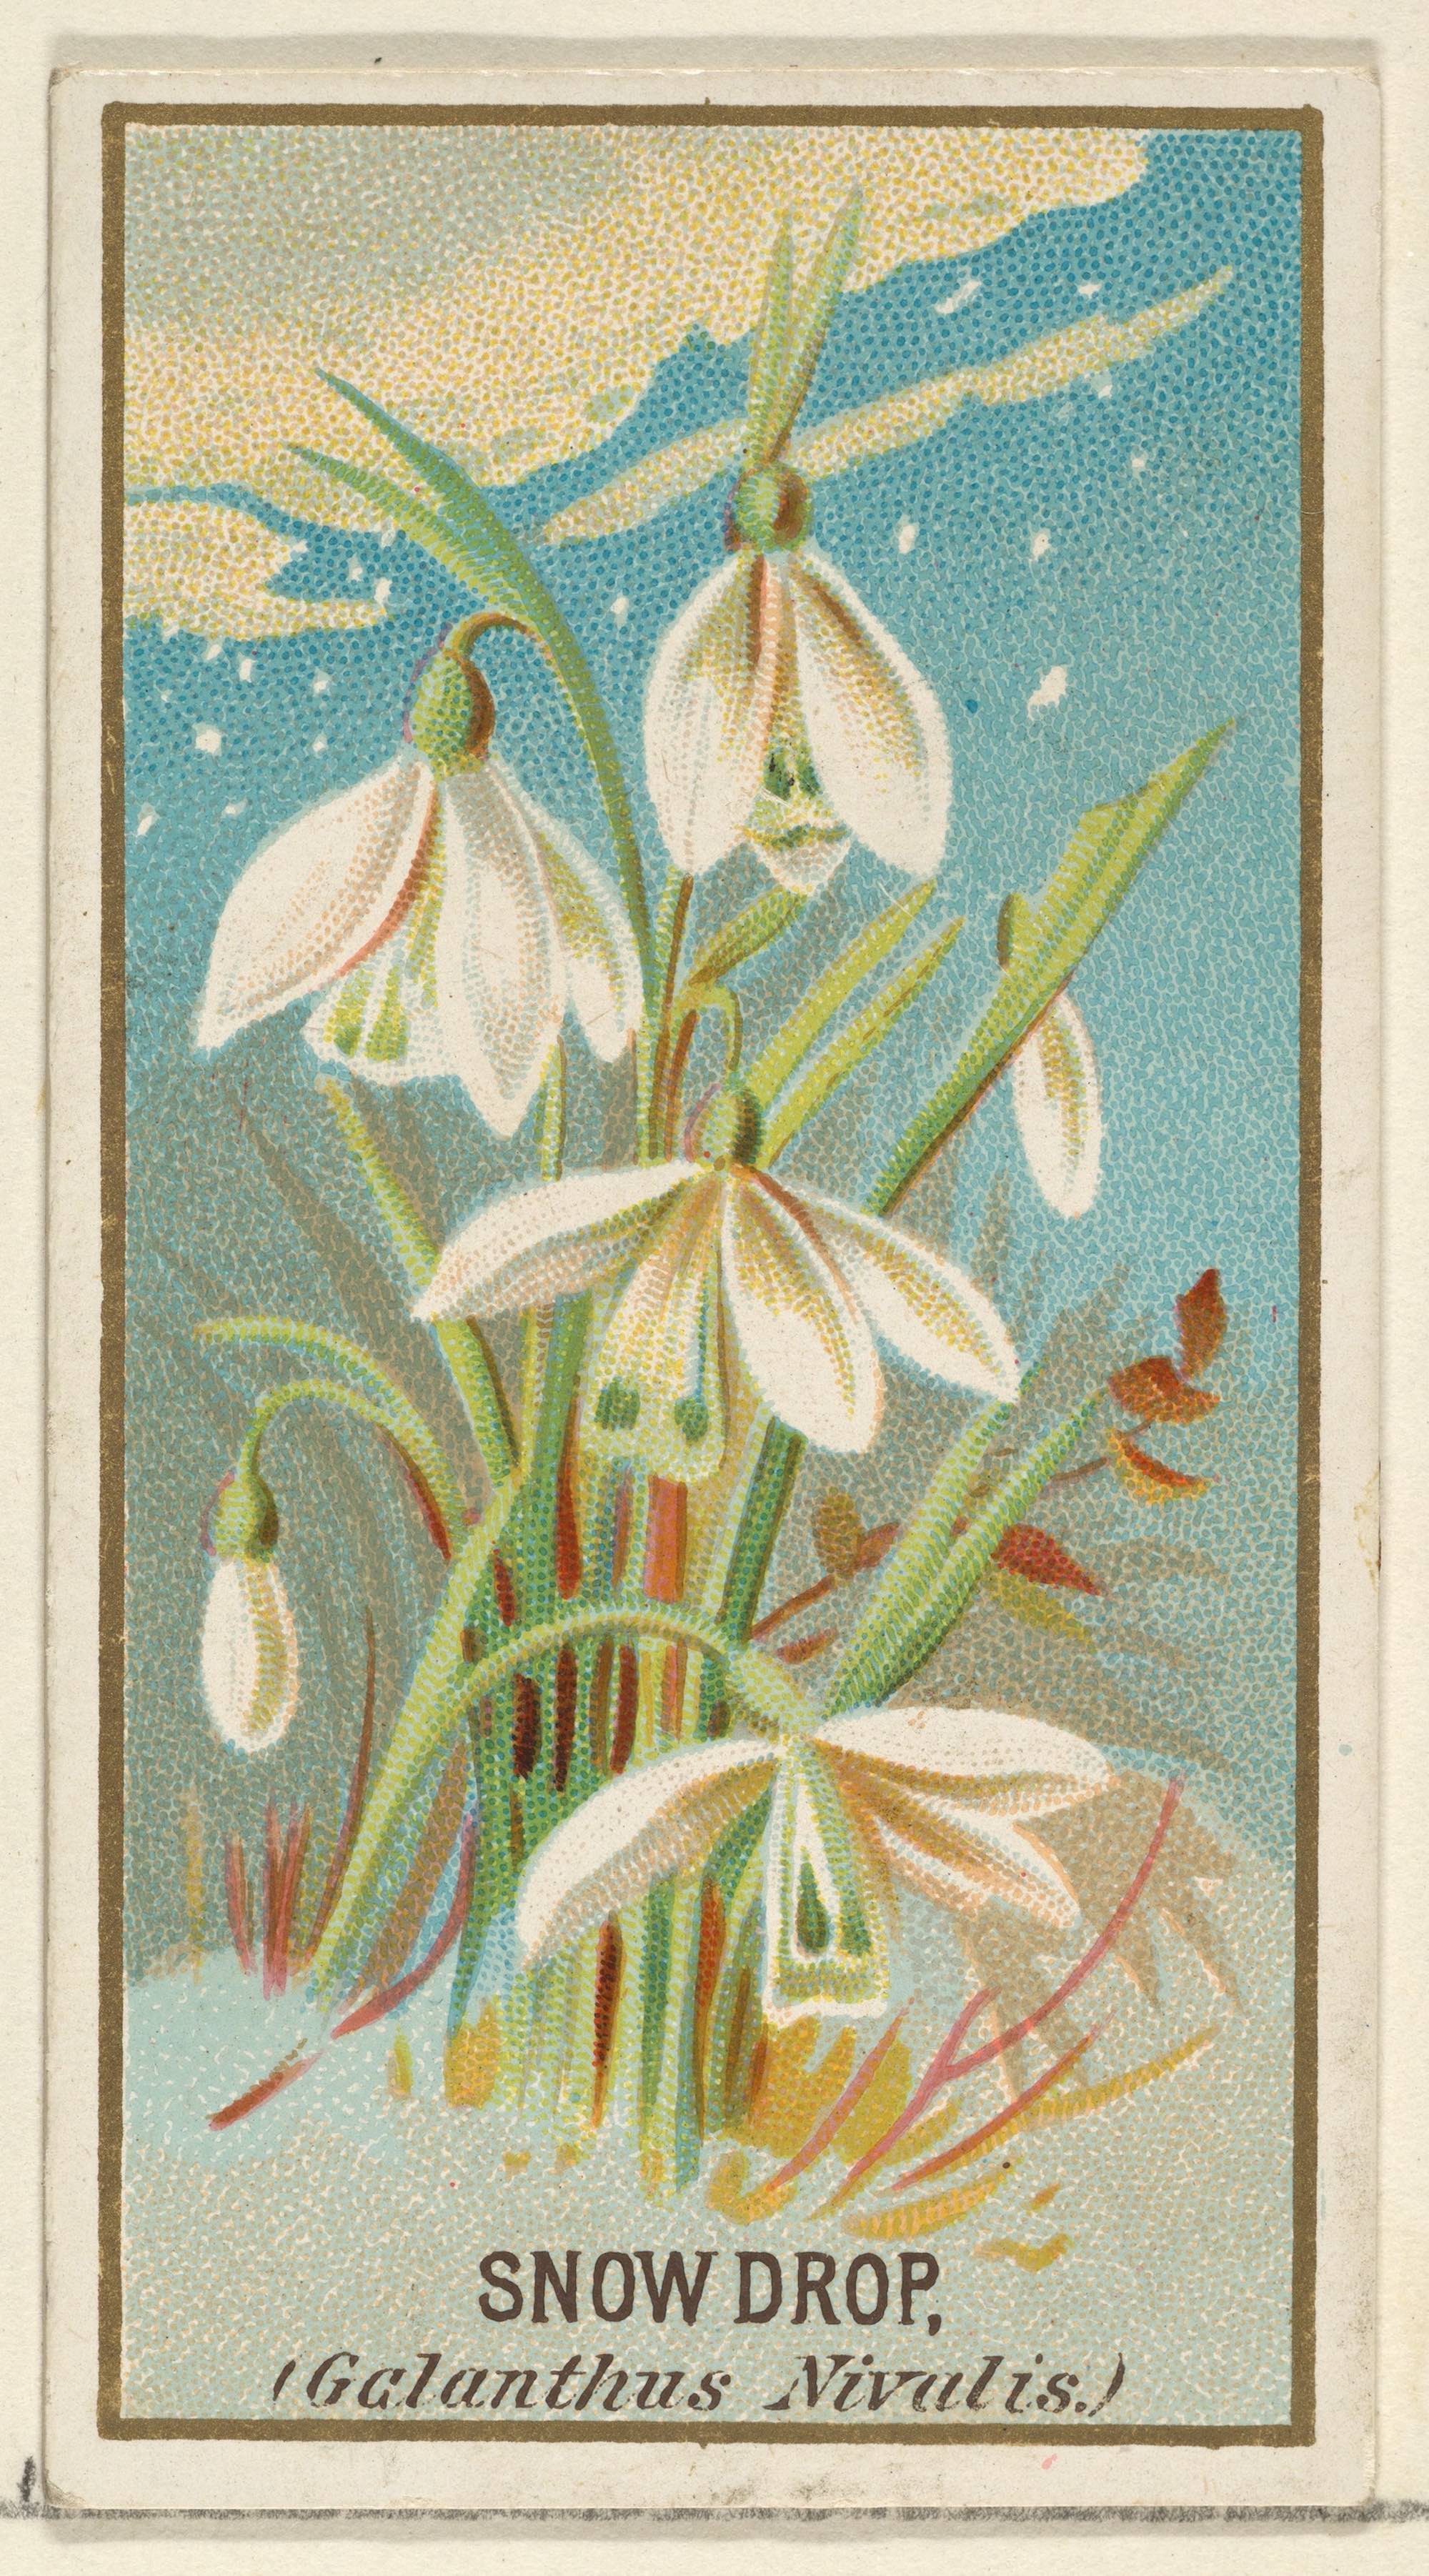 Snowdrop (Galanthus) botanical illustration from the Flowers series for Old Judge Cigarettes circa 1890.